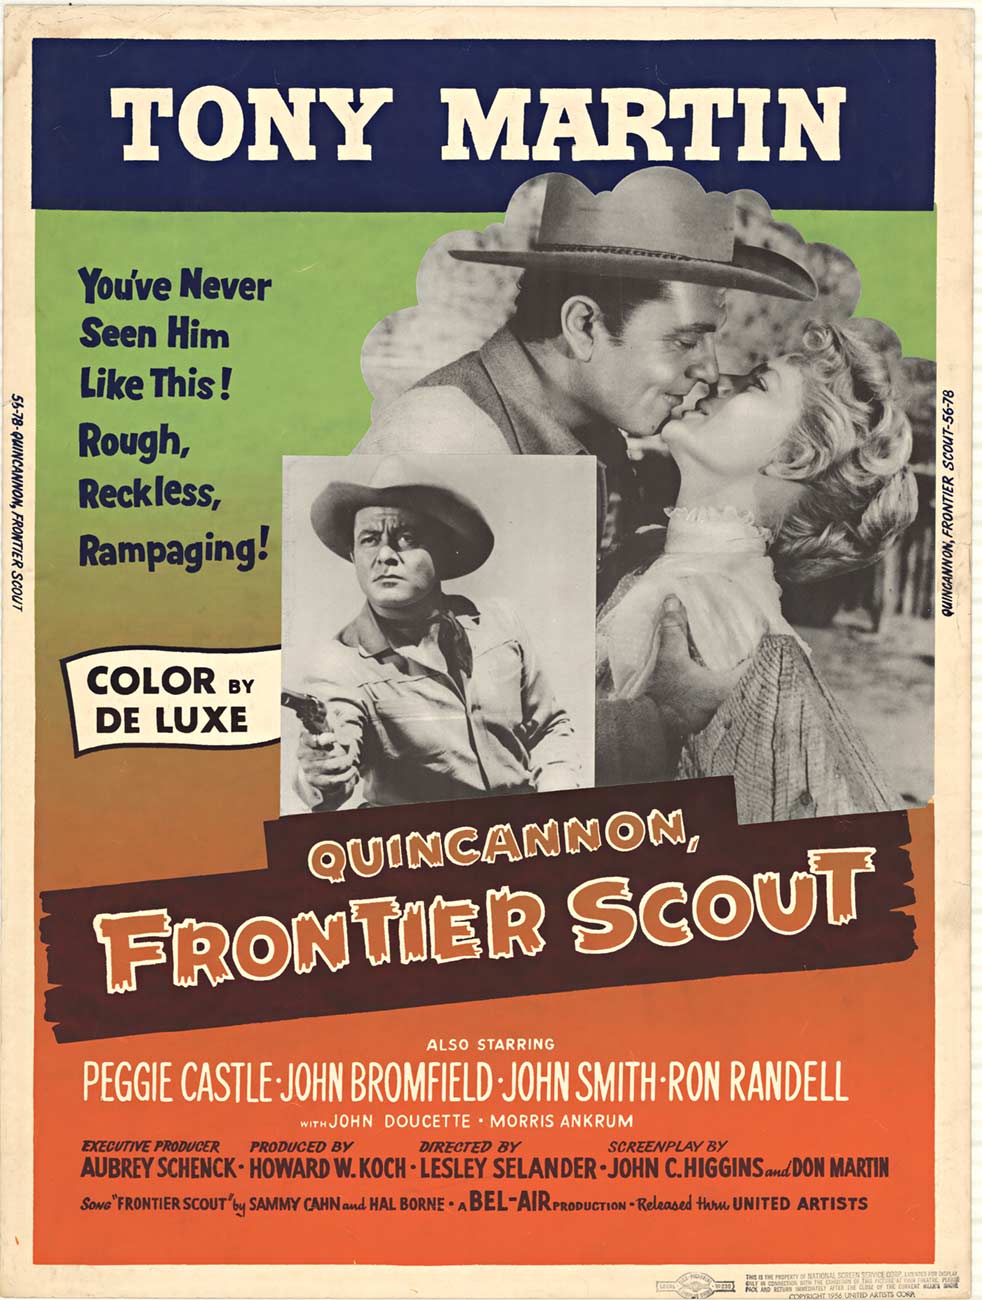 Original U.S. One sheet untrimmed 30 x 40" printer's proof for the movie poster Frontier Scout. Rolled, not folded. Very good condition with minor wear along the borders. <br> <br>Synopsis: Frontier Scout was one of a handful of western vehicles for 